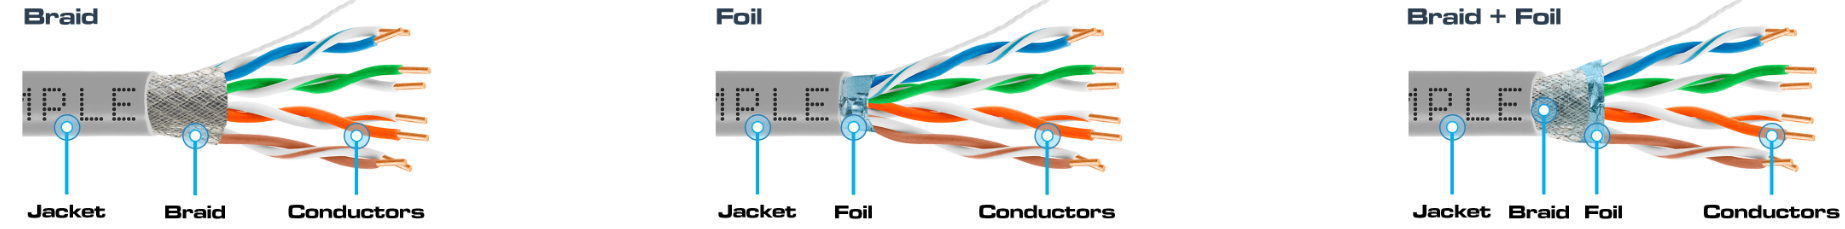 Cat5 cables BRAID and FOIL explanation